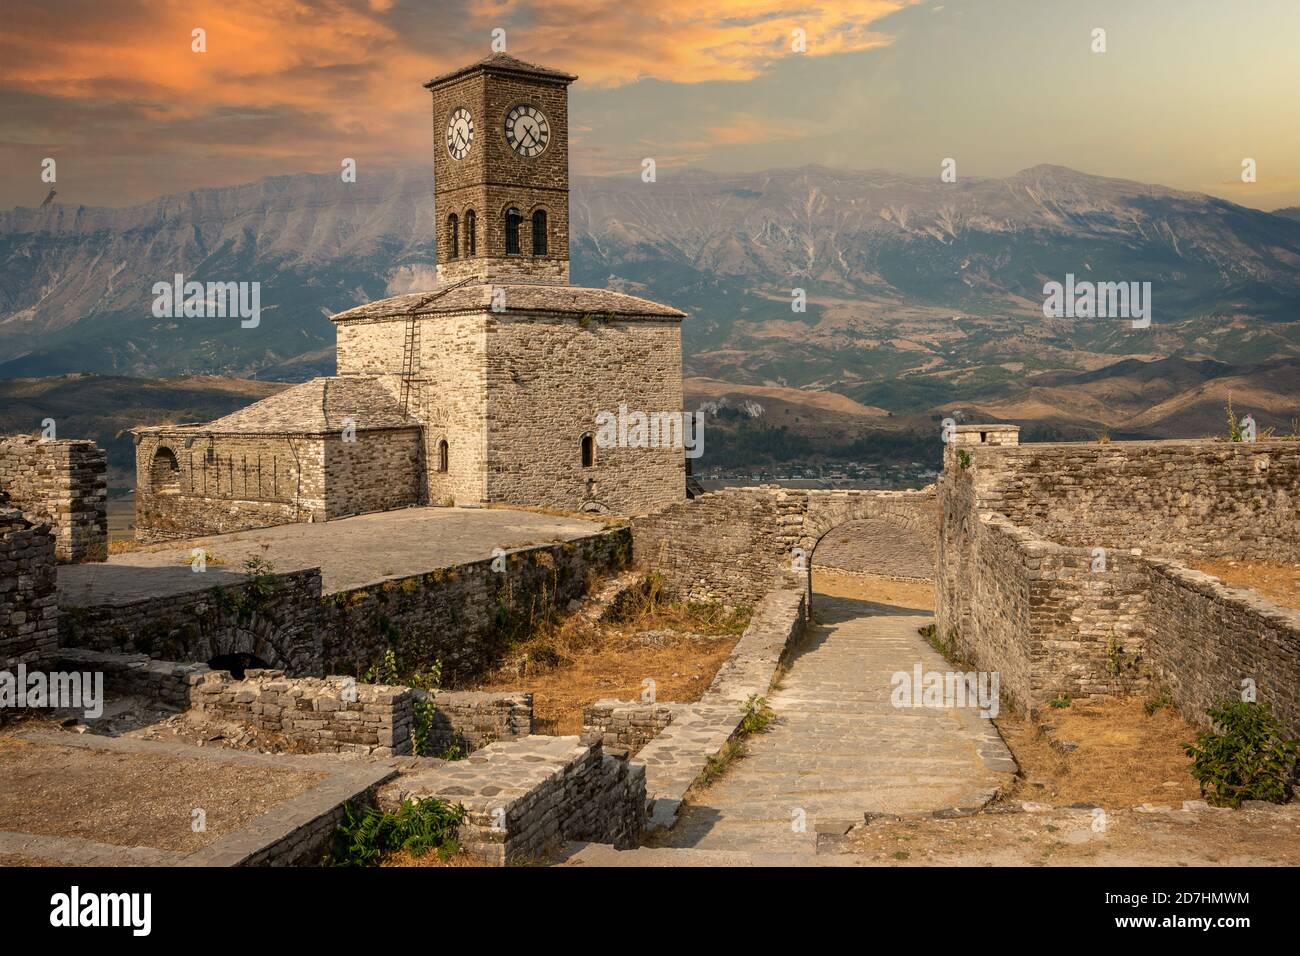 Sunset over clock tower and fortress at Gjirokaster castle, Albania Stock Photo